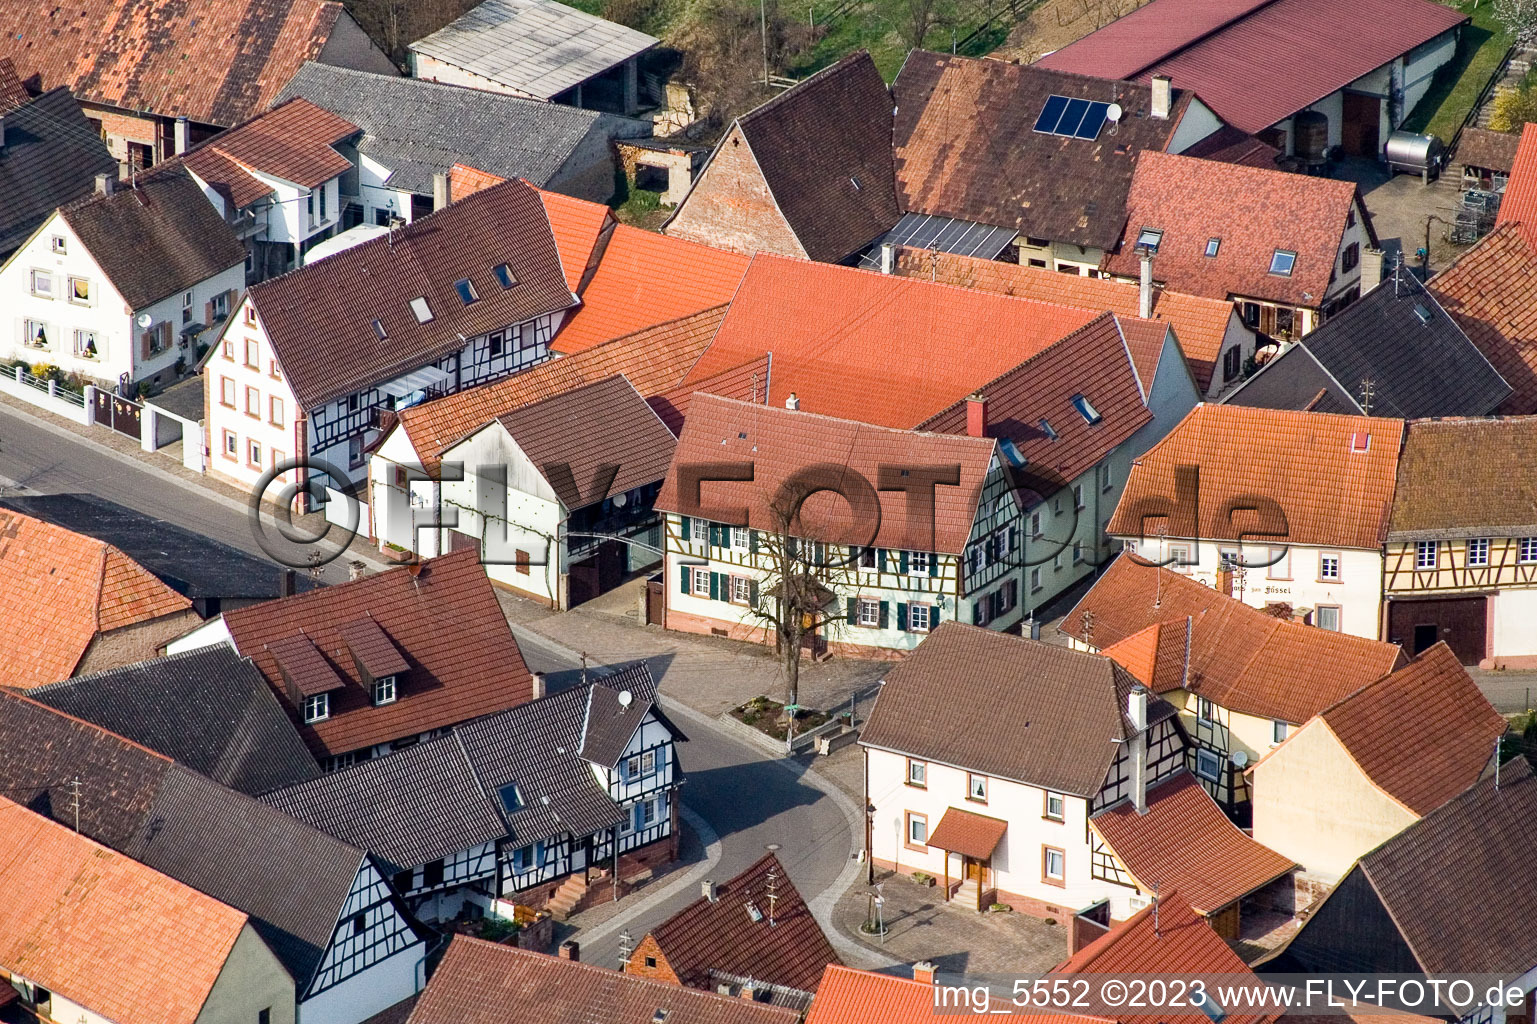 Hergersweiler in the state Rhineland-Palatinate, Germany from the drone perspective